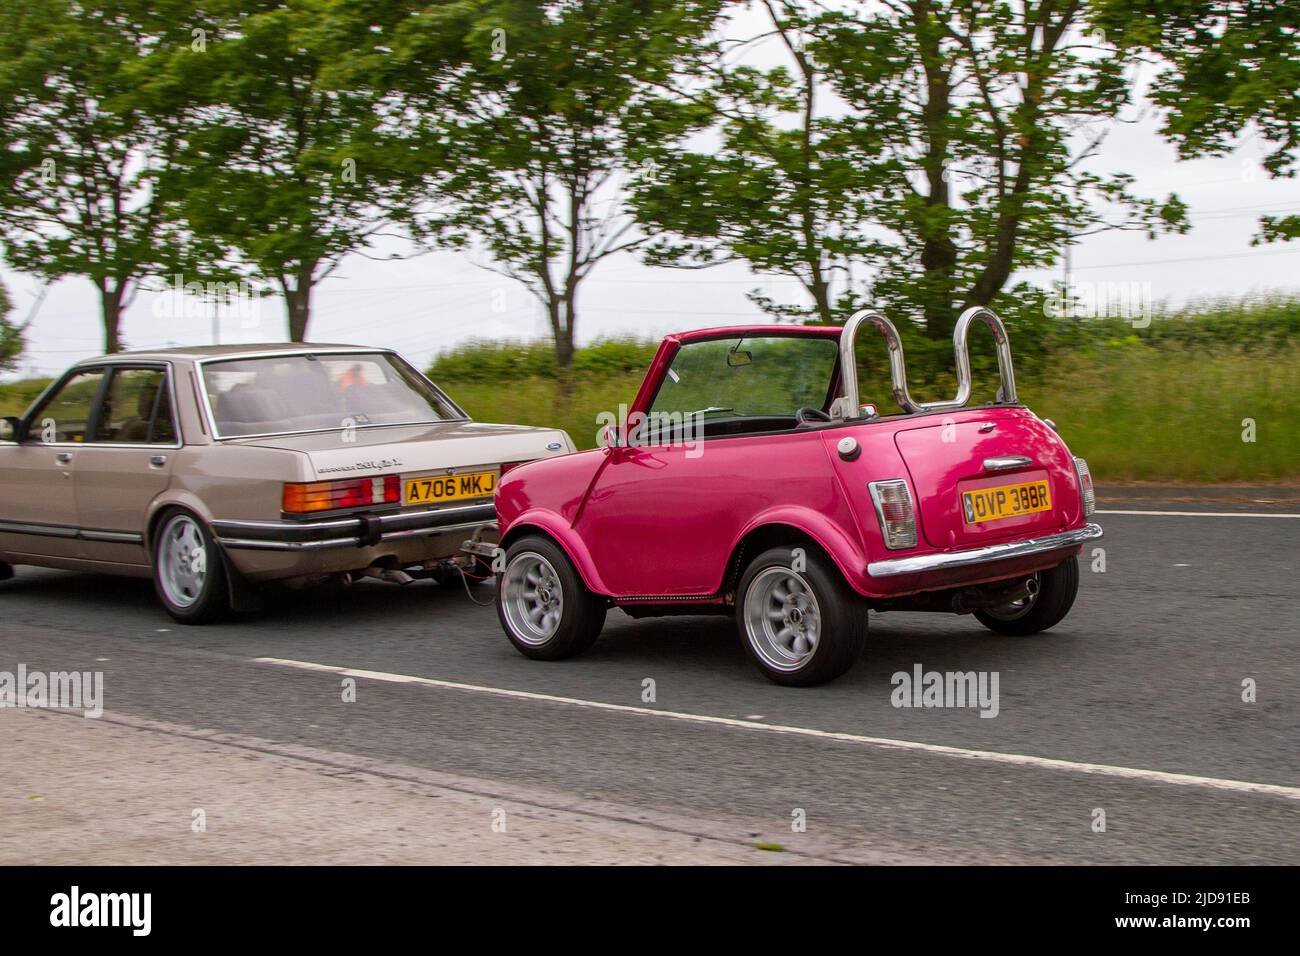 1977 70s seventies pink Leyland Mini 1000 cars 998cc customised shortened vehicle being towed by 1983 80s Ford Granada;  classic, modern classic, supercars and specialist vehicles en-route to Lytham St Annes, Lancashire, UK Stock Photo